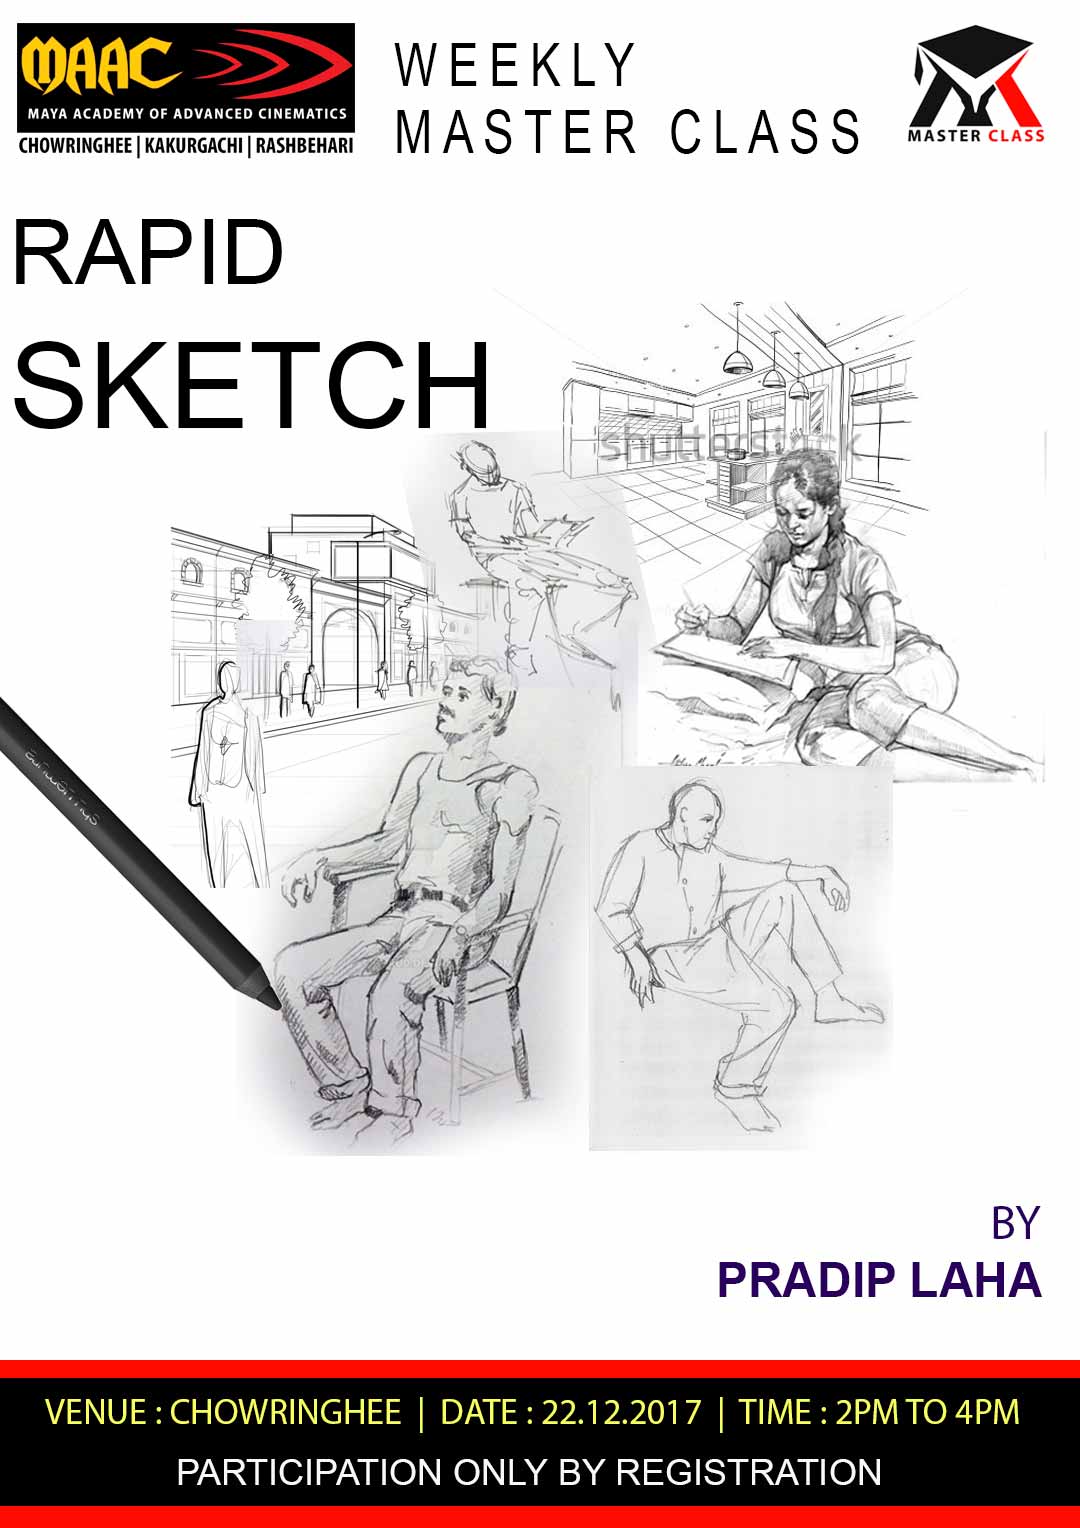 Weekly Master Class on Rapid Sketch